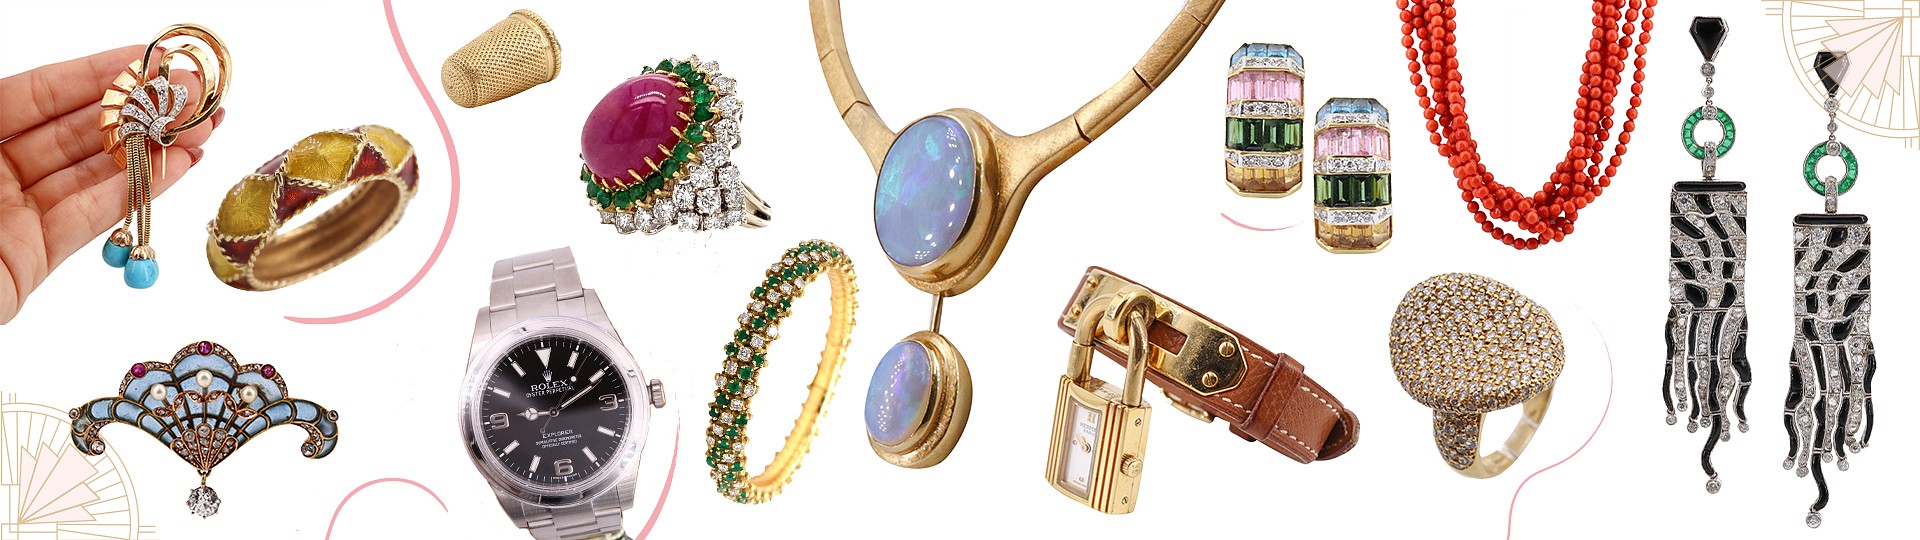 New Year - New Estate Jewelry Collection by WinBids Auctions